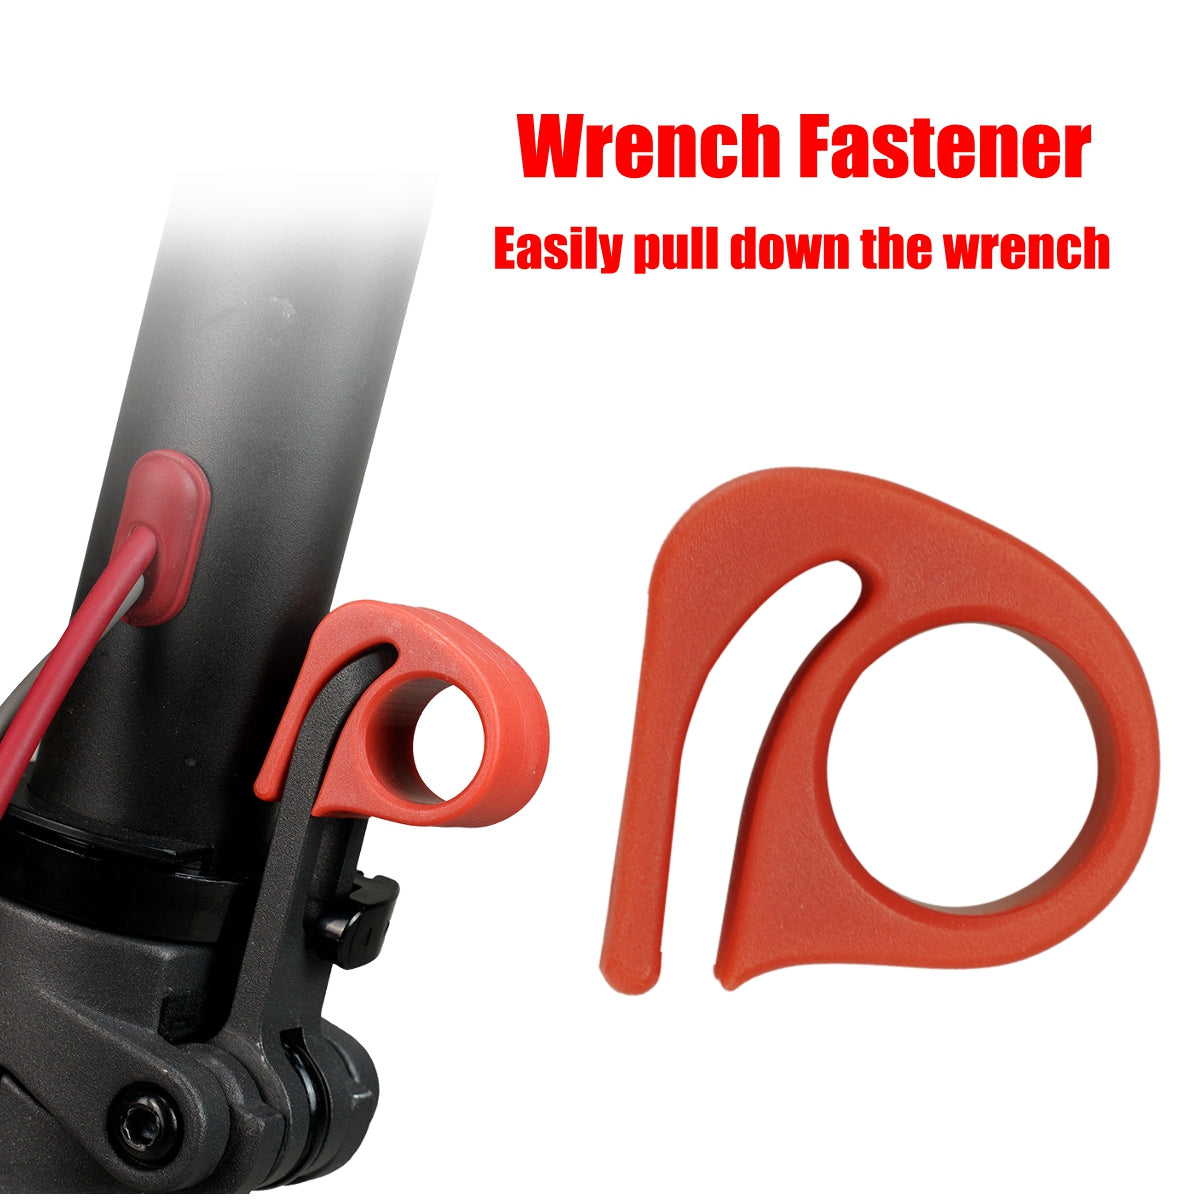 Starter Kit Dash Wrench Fender Bracket Parts Scooter Accessories For M365 M187 / PRO Scooter - Auto GoShop